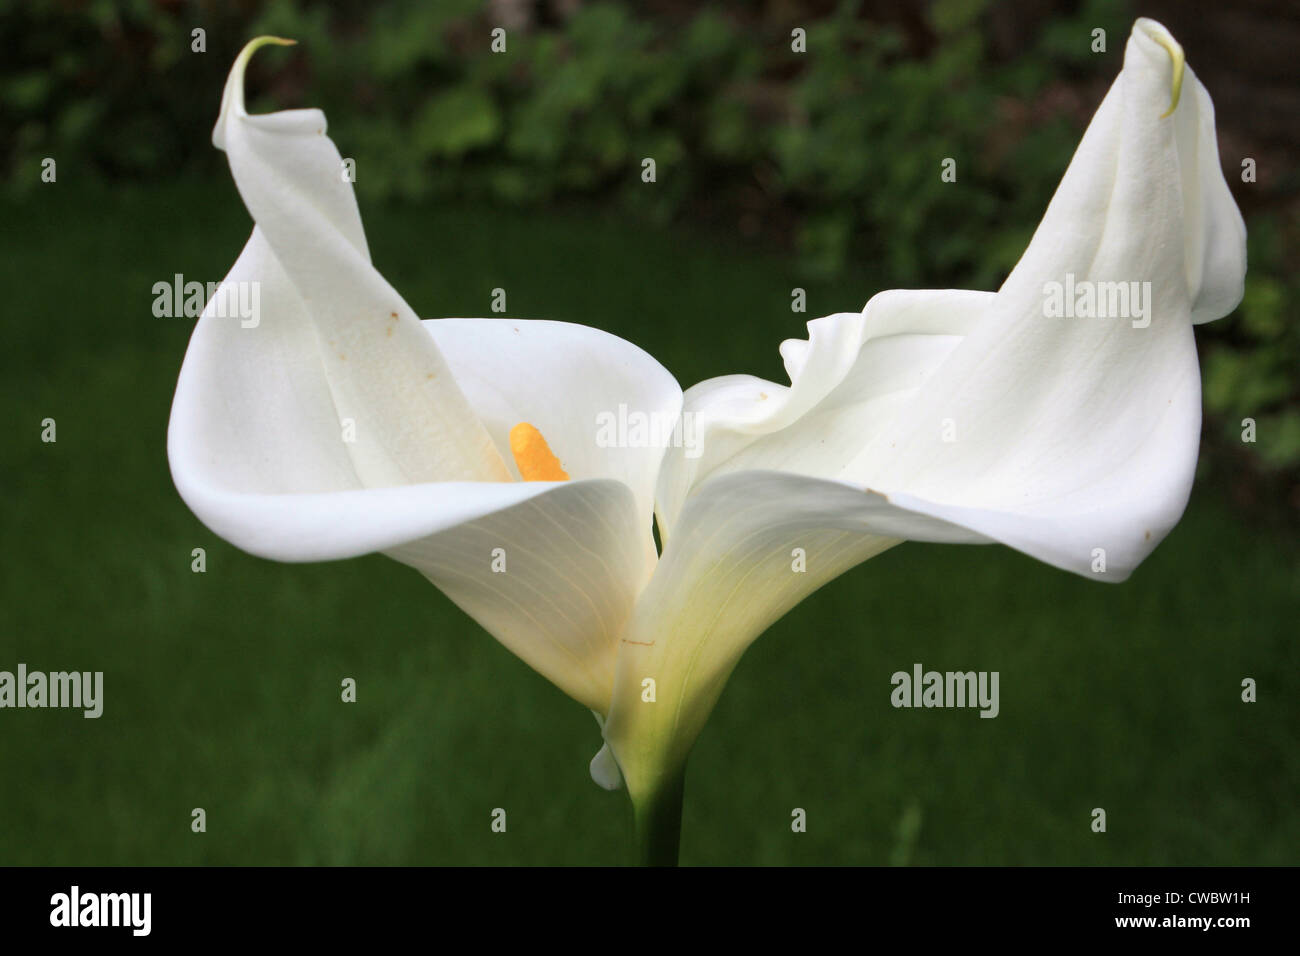 Exrtemely Rare (Double Headed) Arum Lily Stock Photo